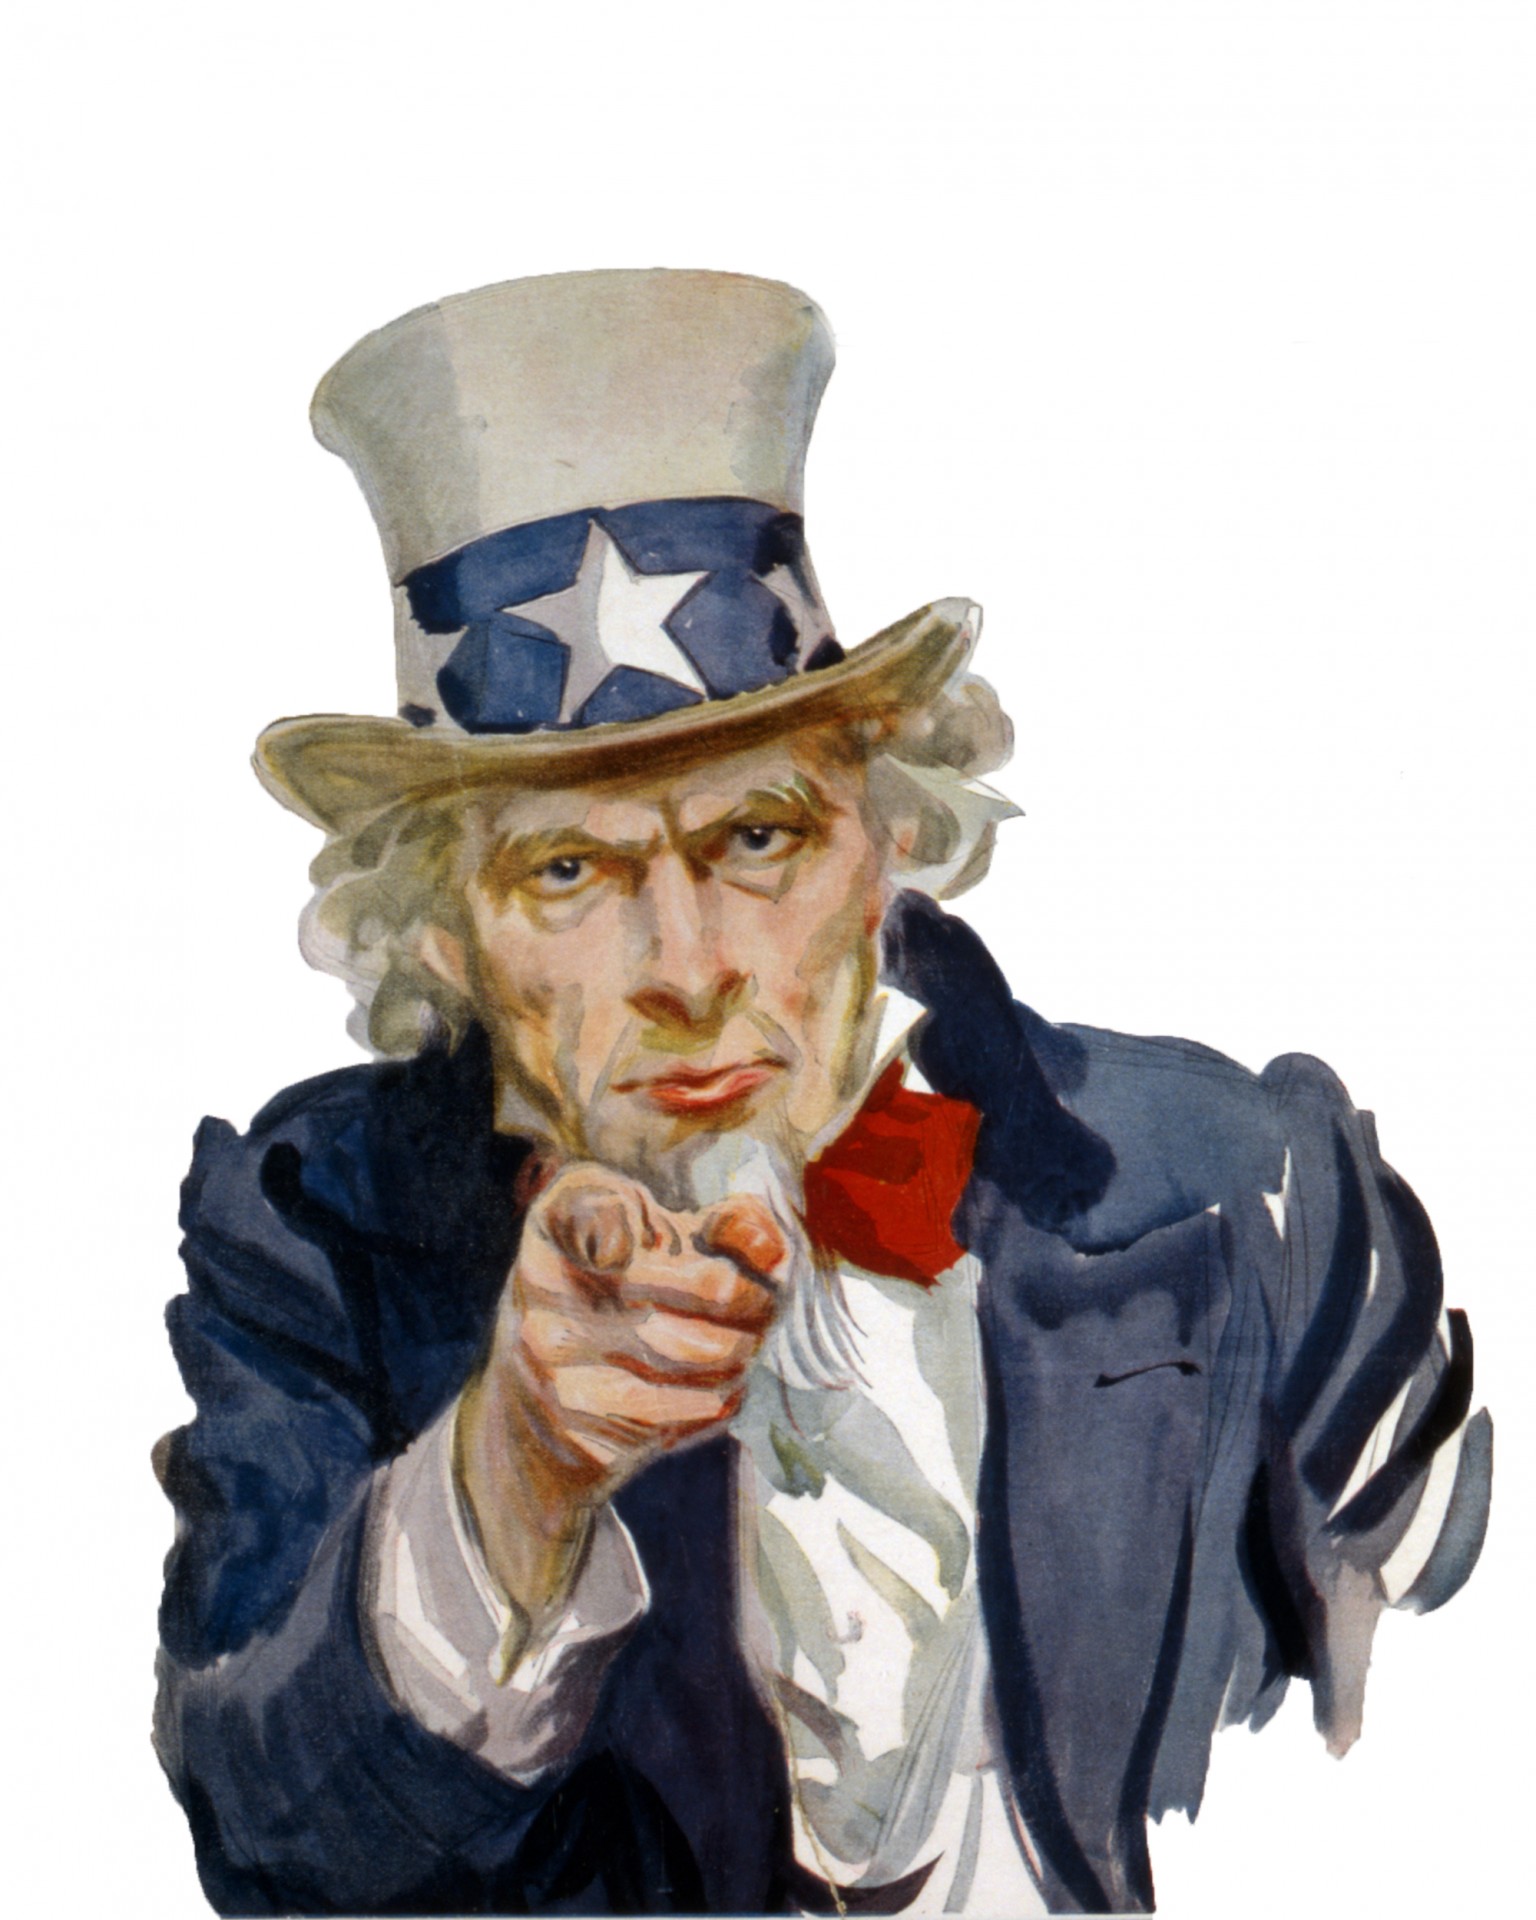 uncle sam pointing as external link in legal blog